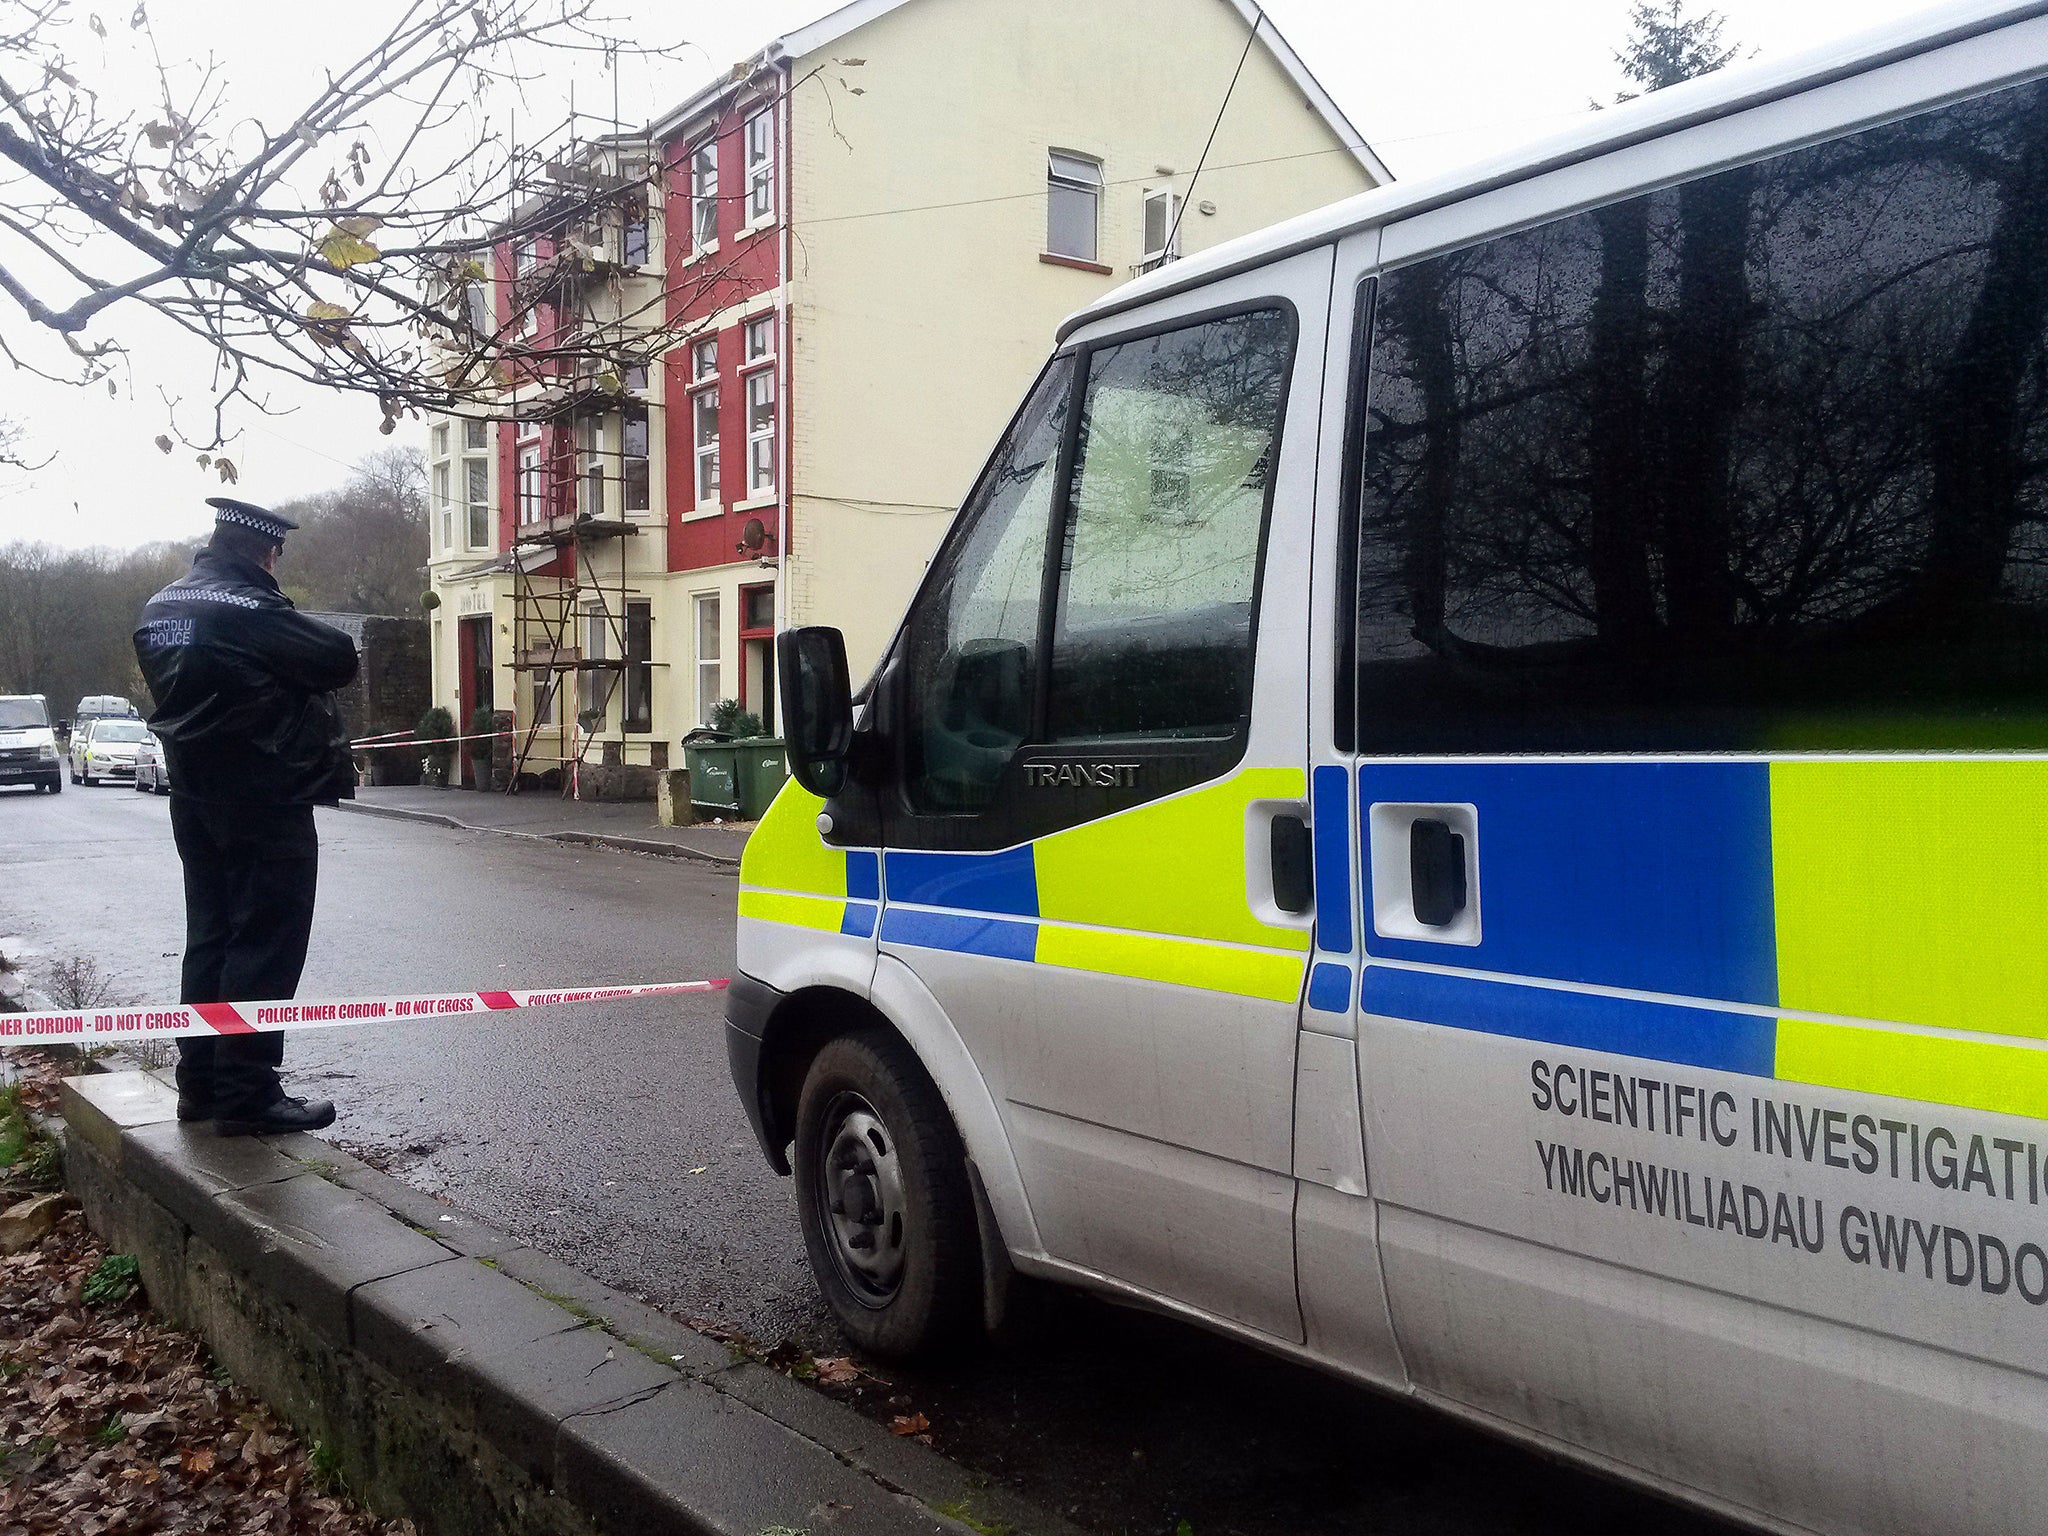 A woman has been murdered and a man has died in custody in South Wales